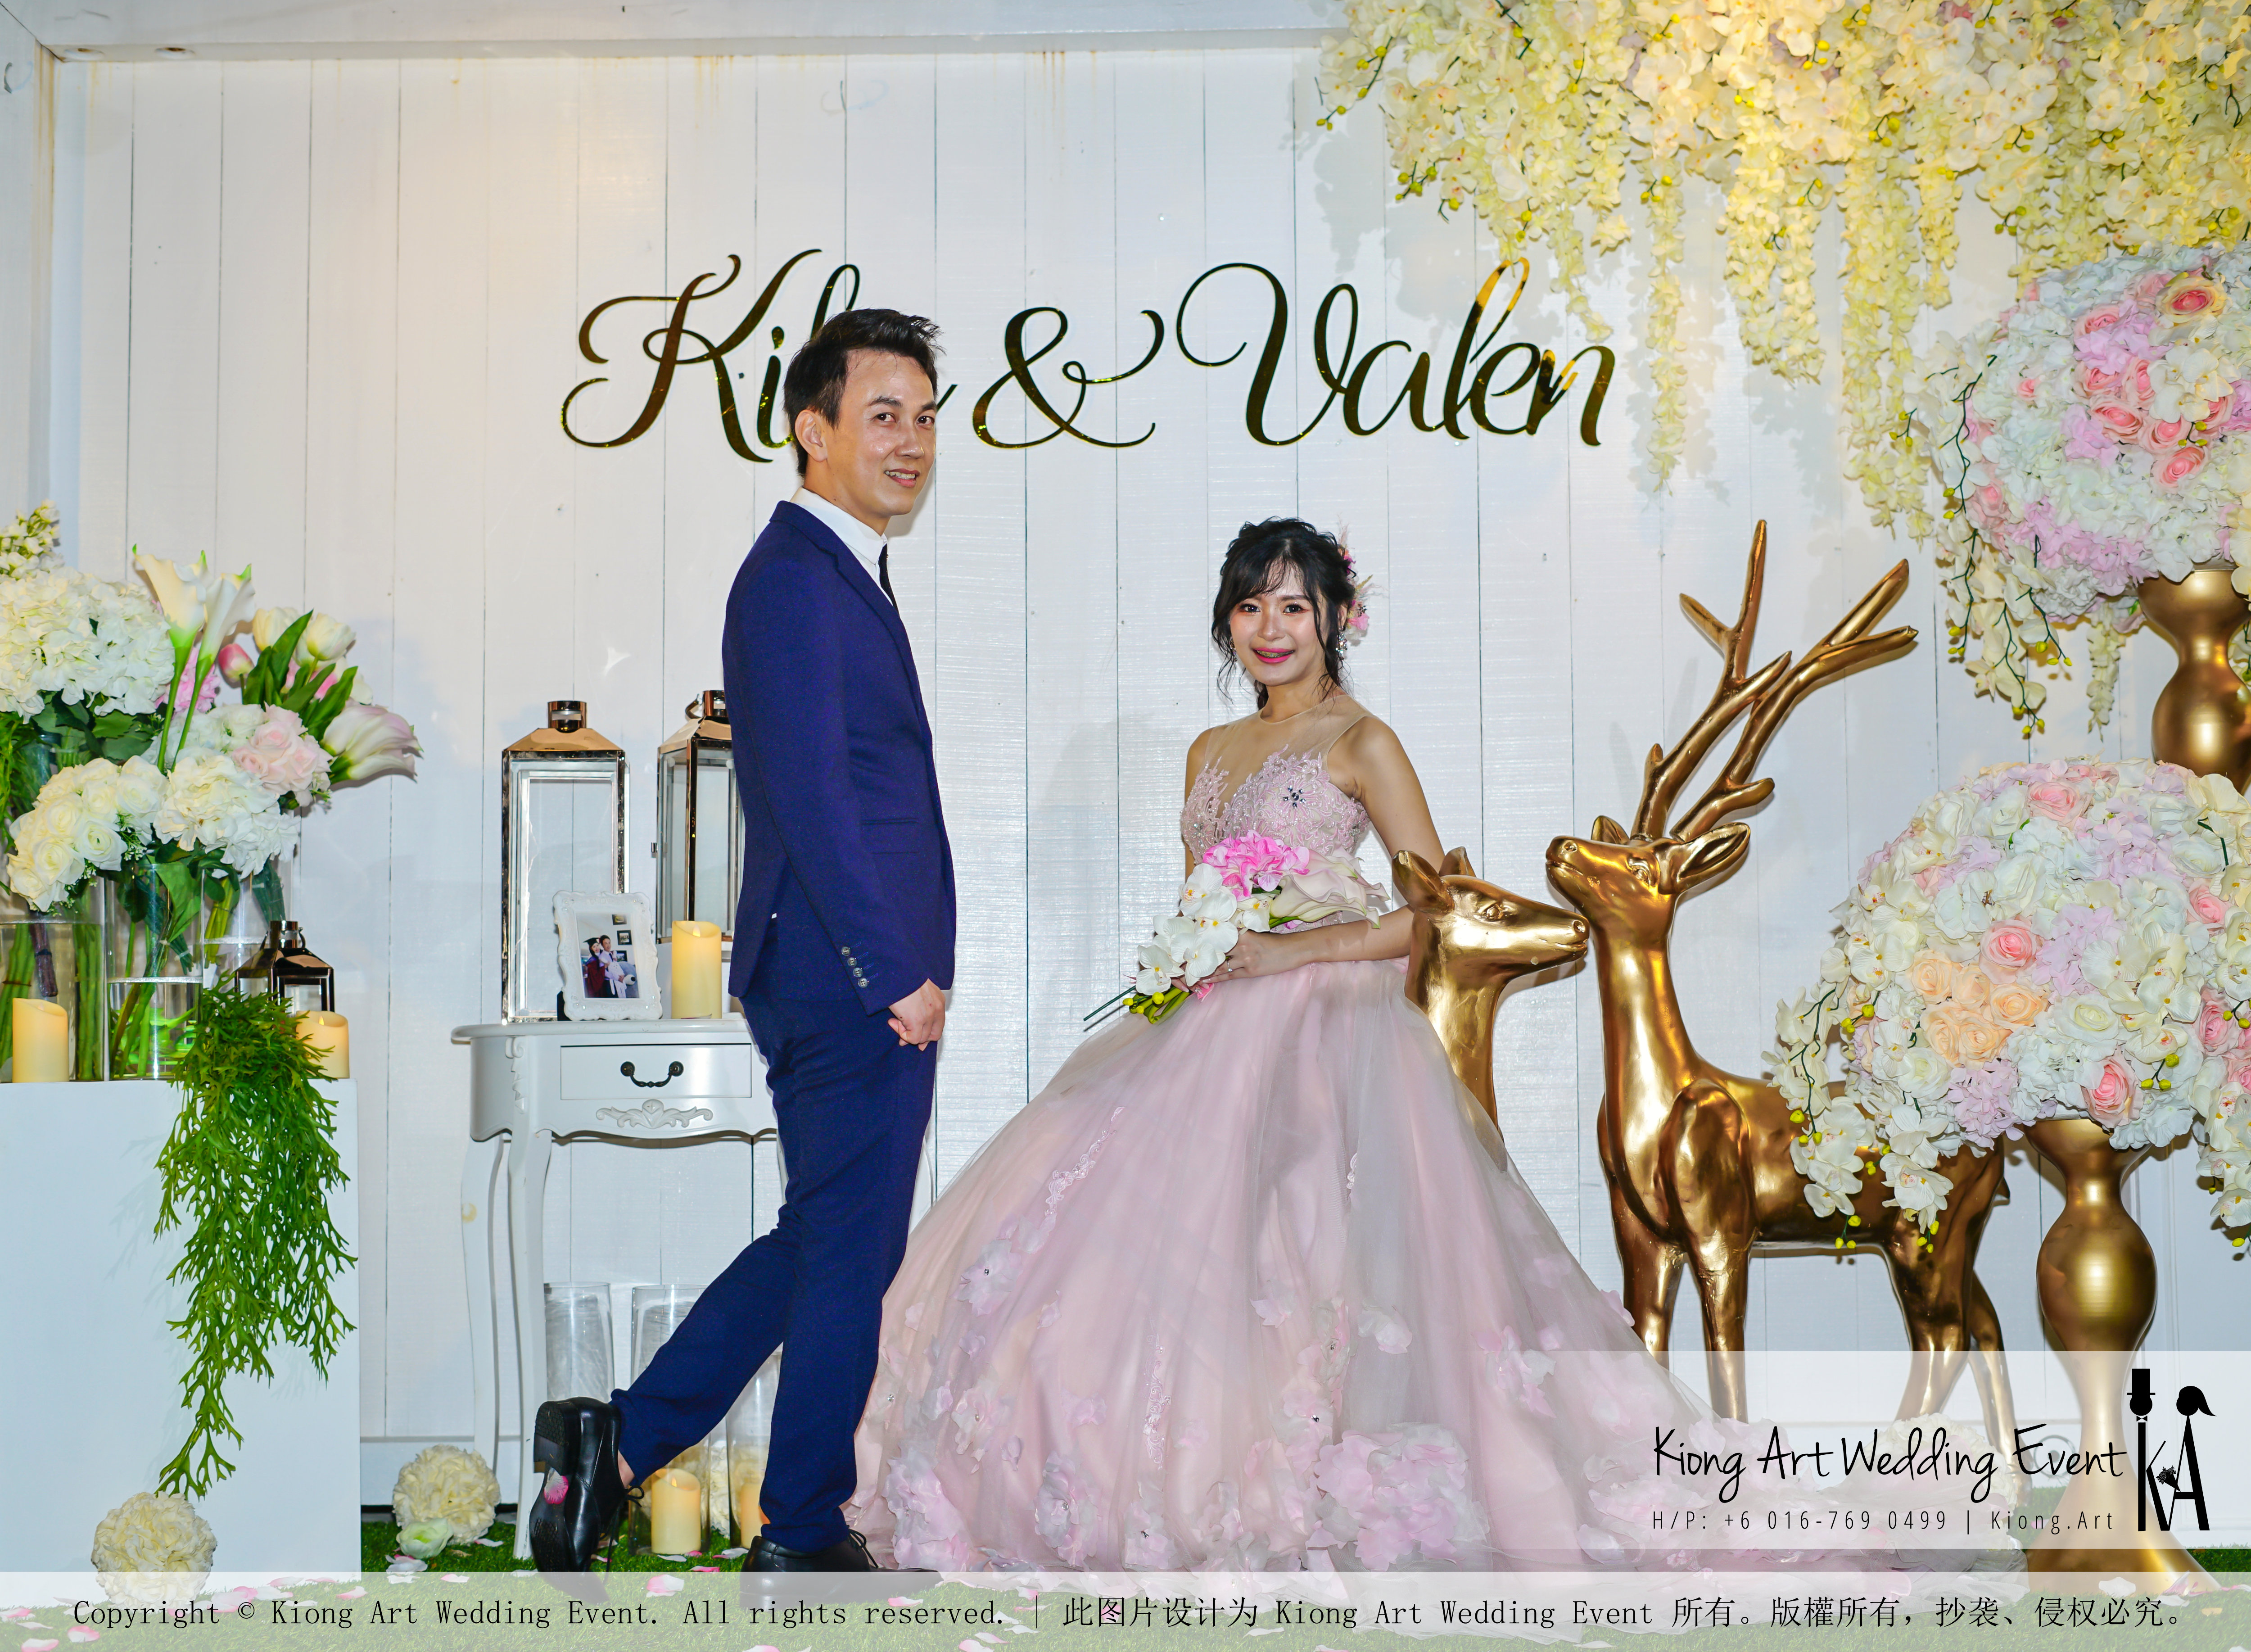 Kiong Art Wedding Event Kuala Lumpur Malaysia Wedding Decoration One-stop Wedding Planning Warm Outdoor Romantic Style Theme Kluang Container Swimming Pool Homestay A07-A01-32